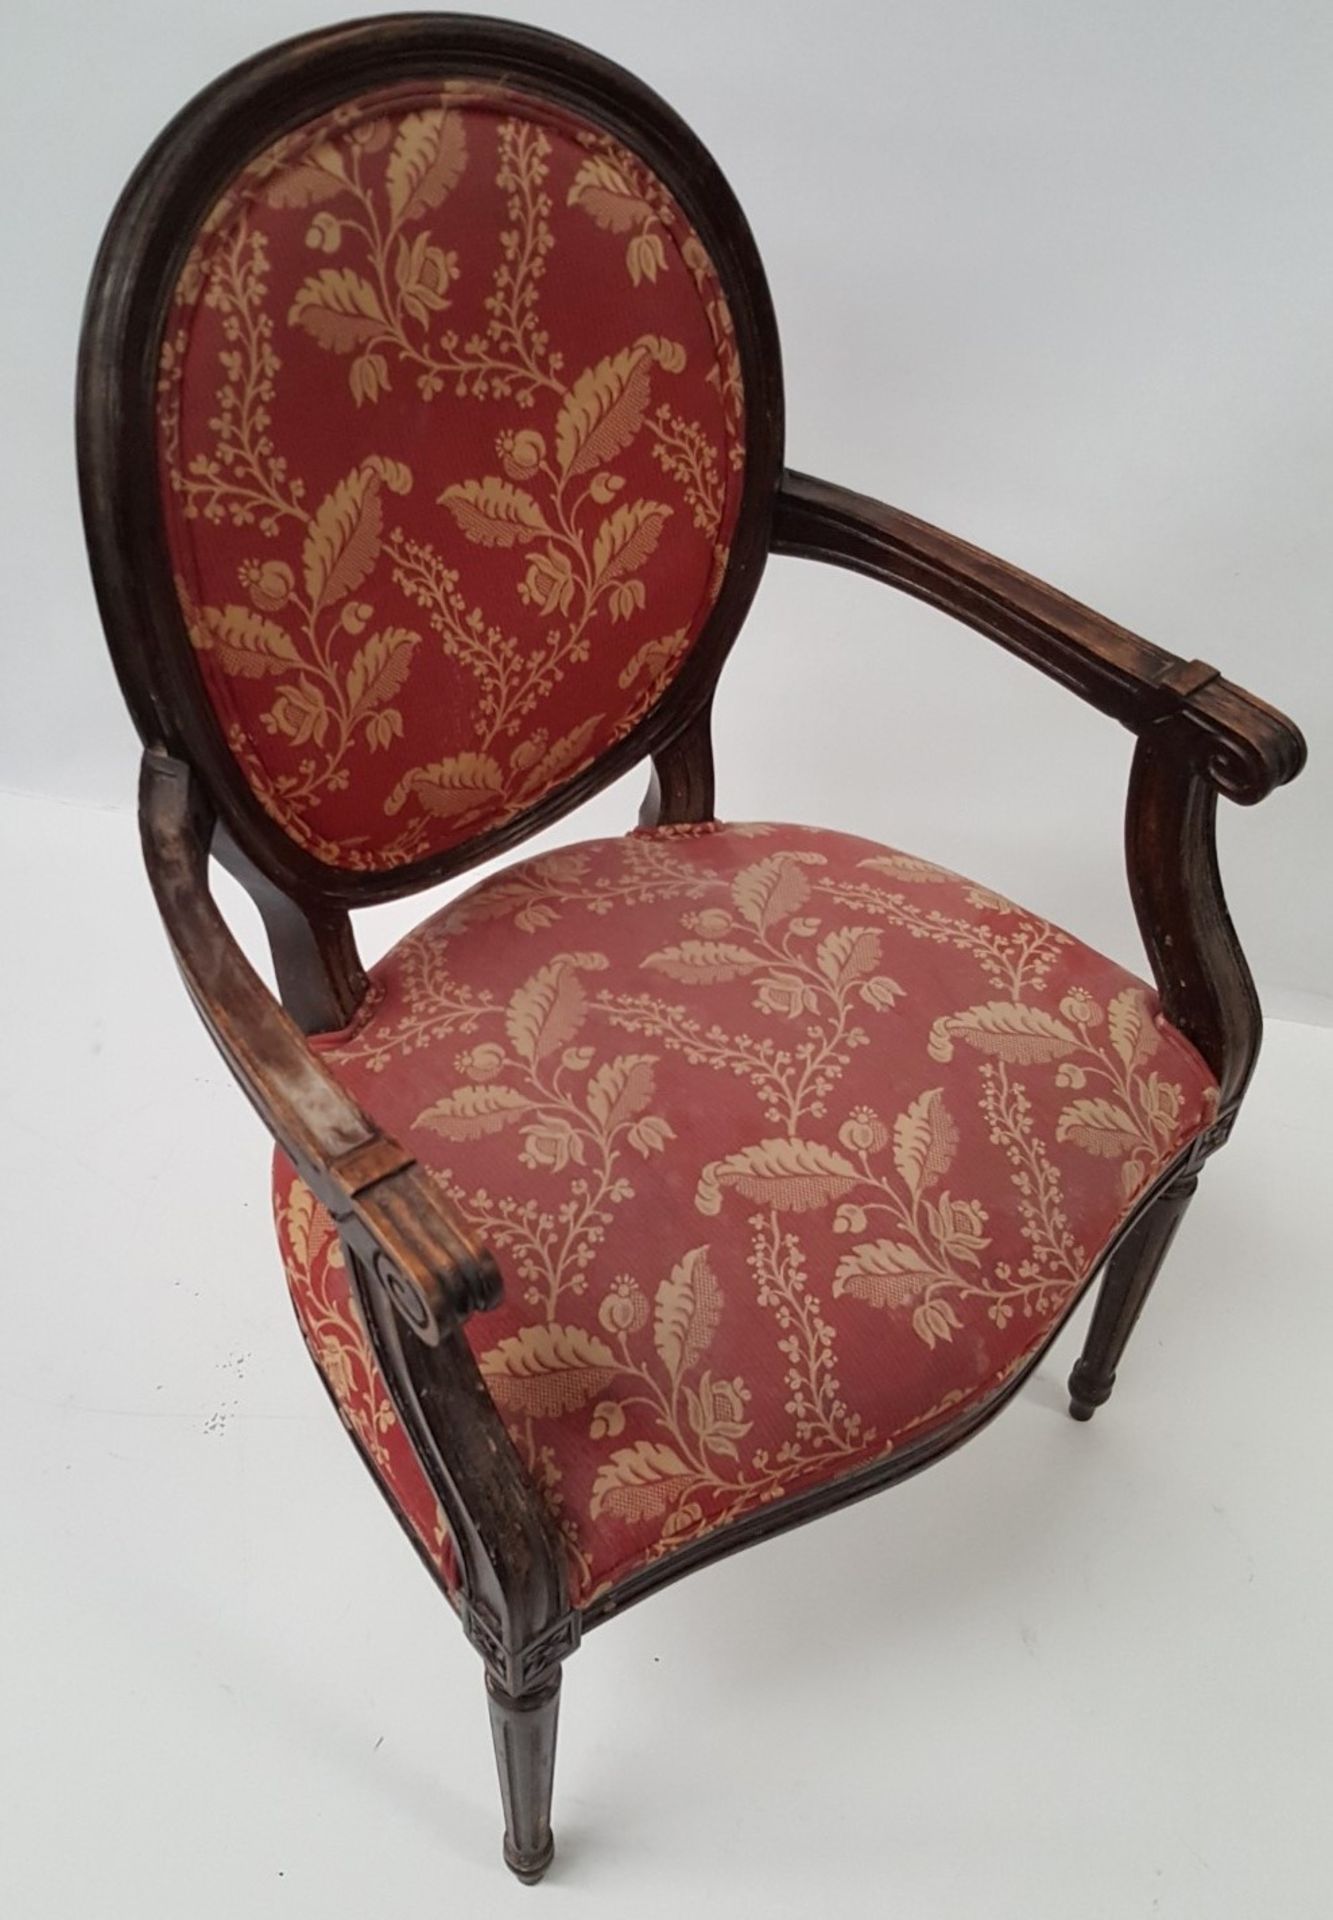 8 x Vintage Wooden Chairs Featuring Spindle Legs, And Upholstered In Red / Gold Floral Fabric - - Image 6 of 8